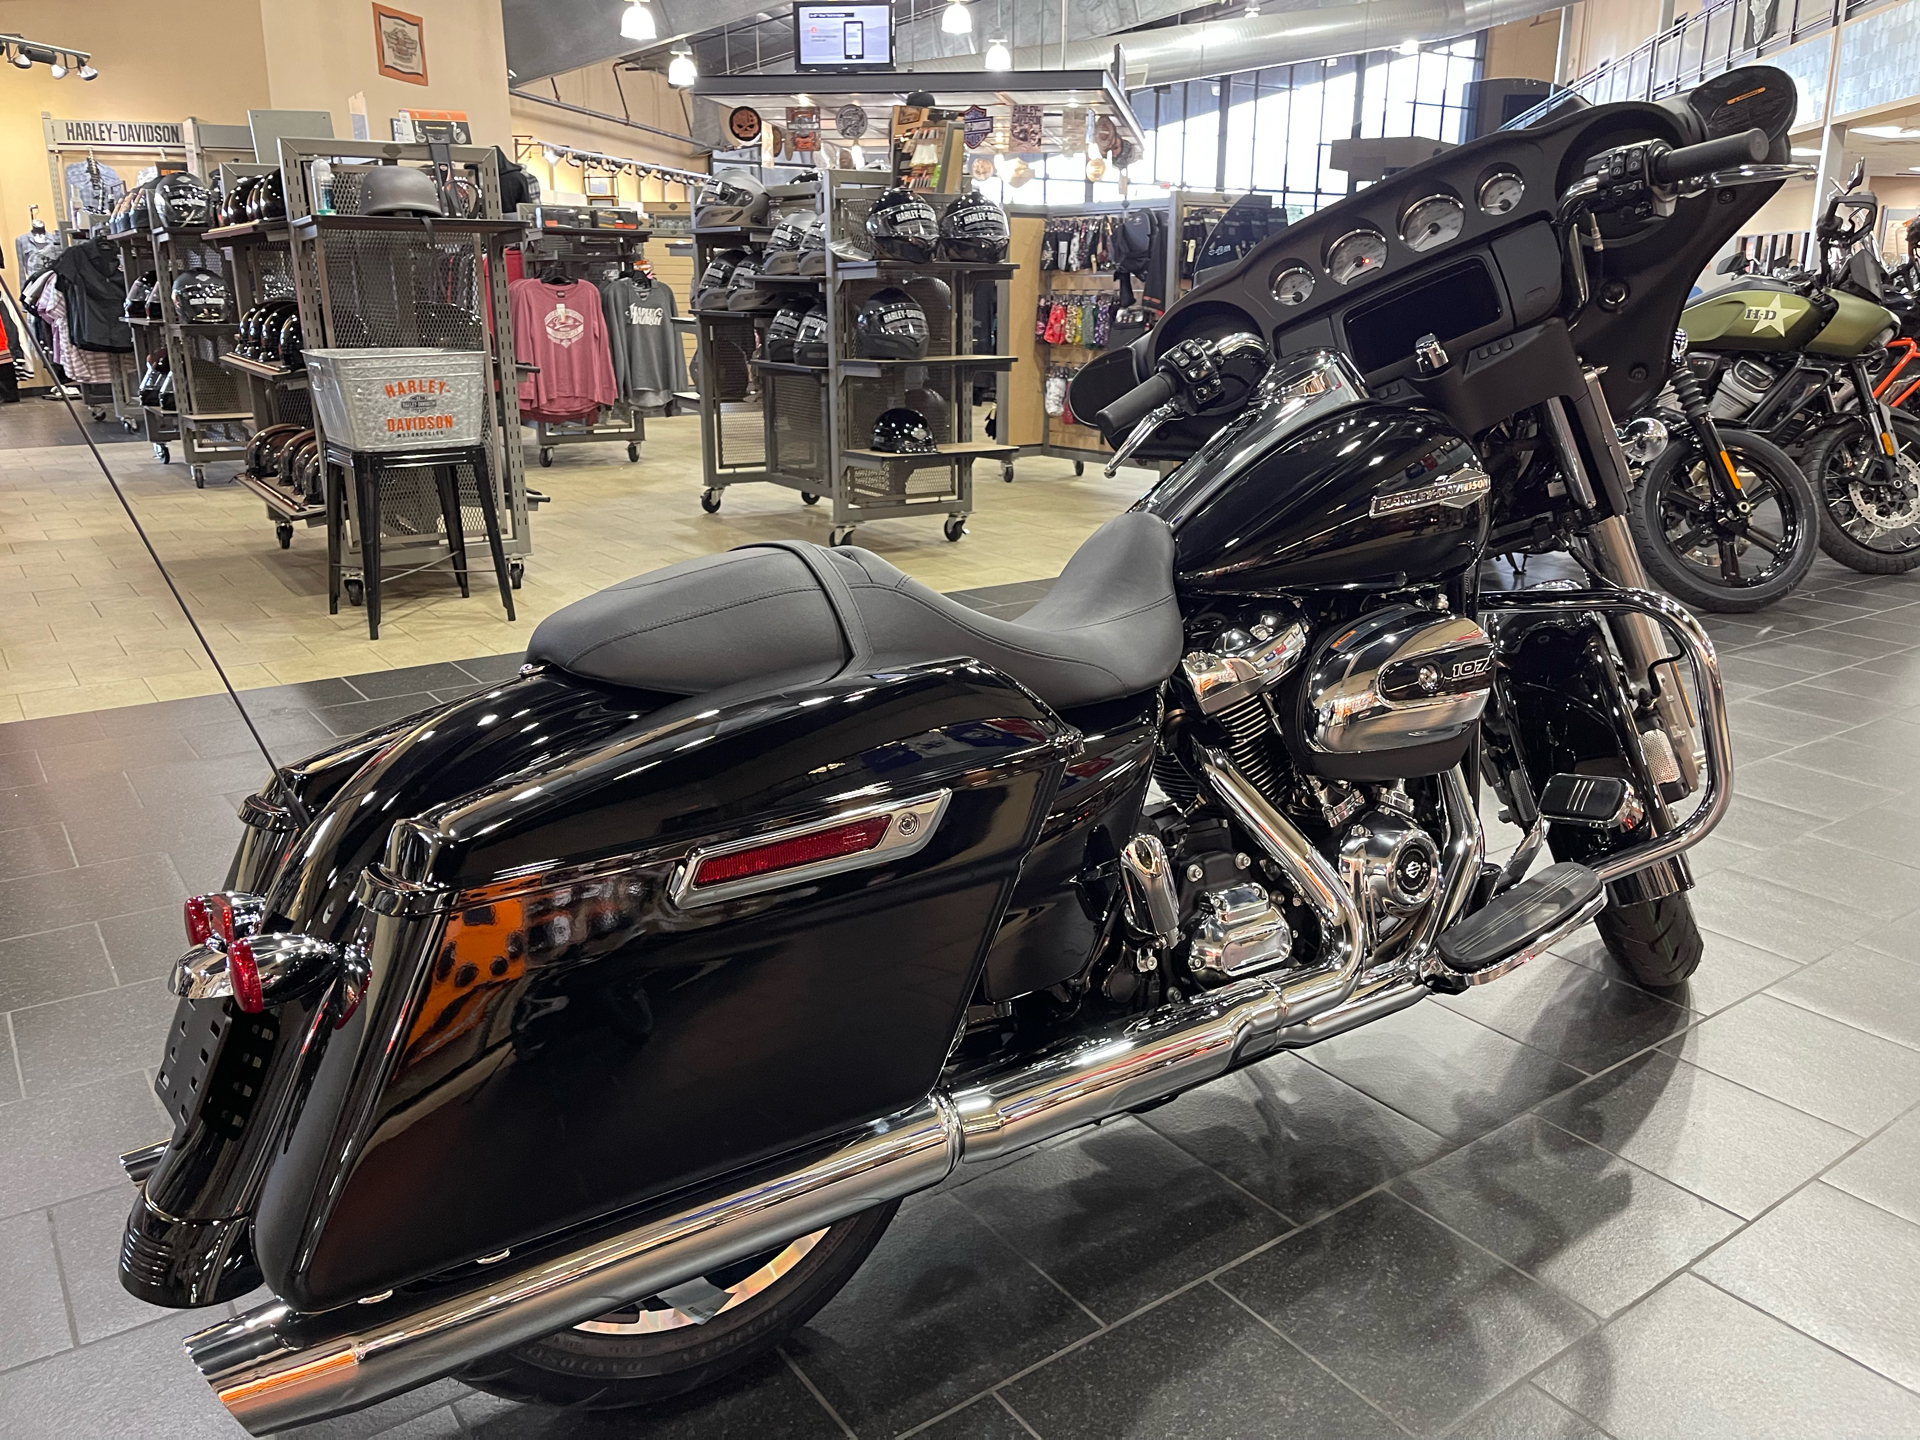 2023 Harley-Davidson Street Glide® in The Woodlands, Texas - Photo 6